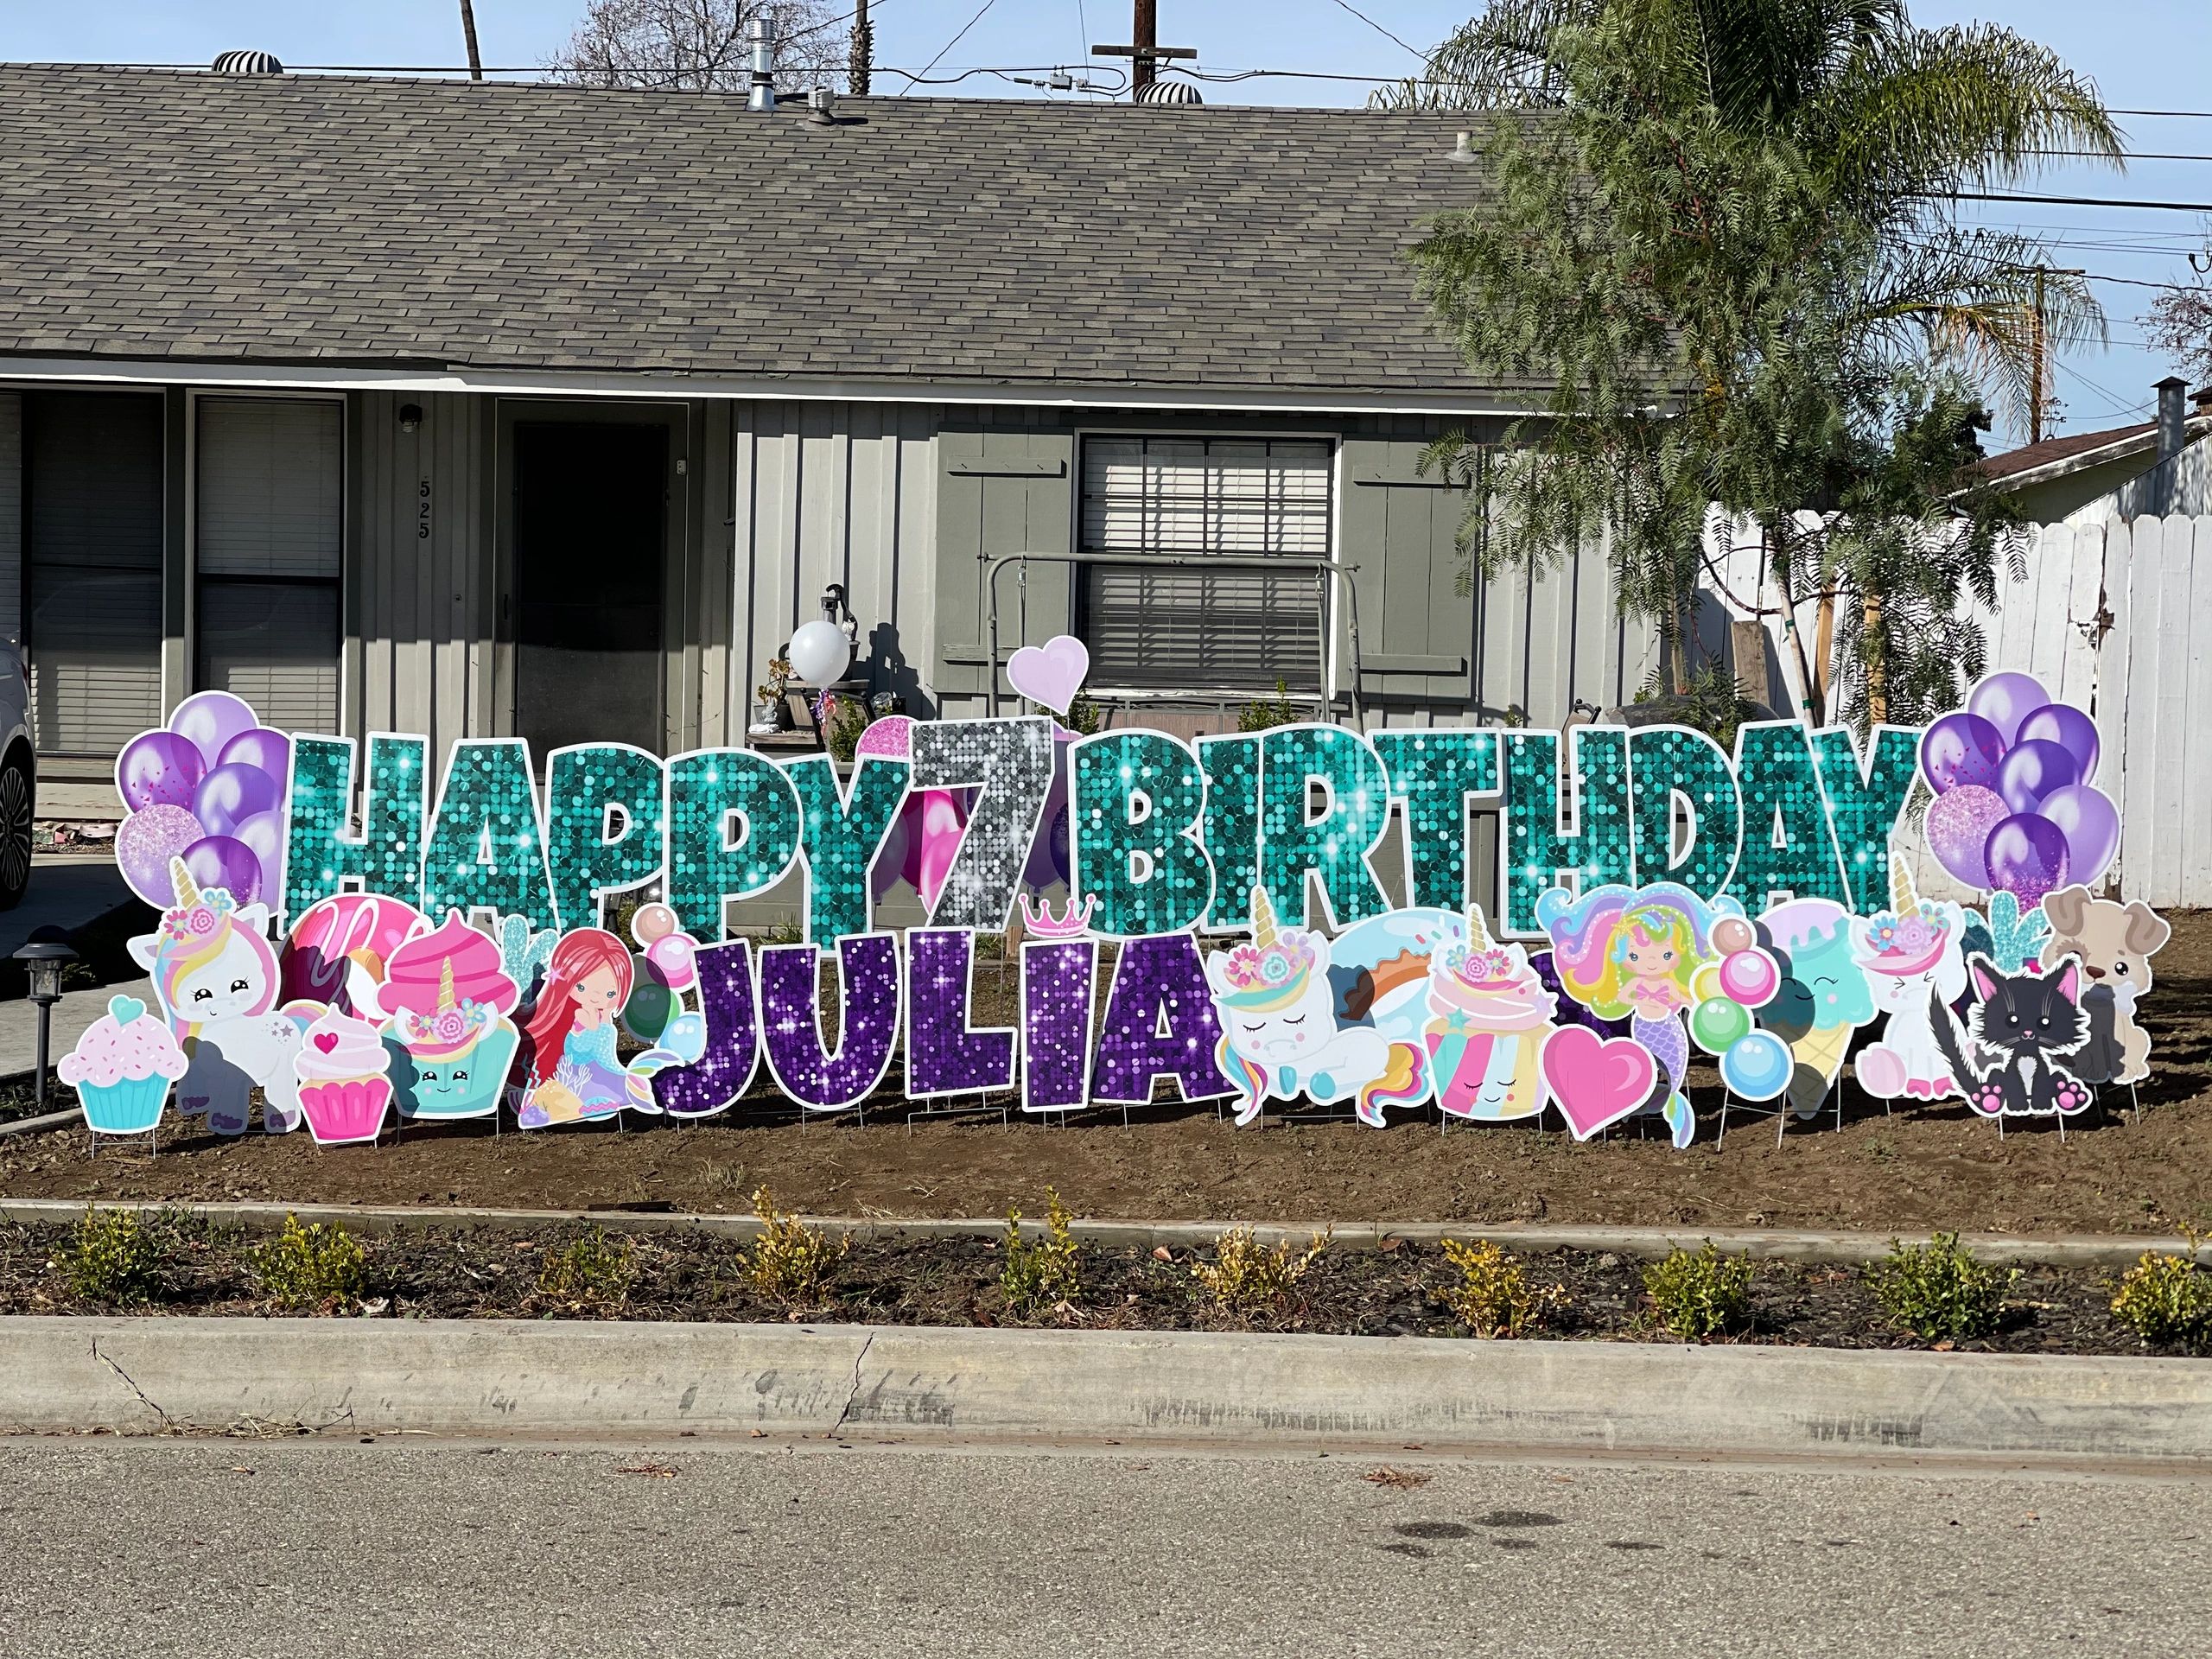 Teal sparkle Happy Birthday yard sign with mermaids, unicorns, balloons and presents.